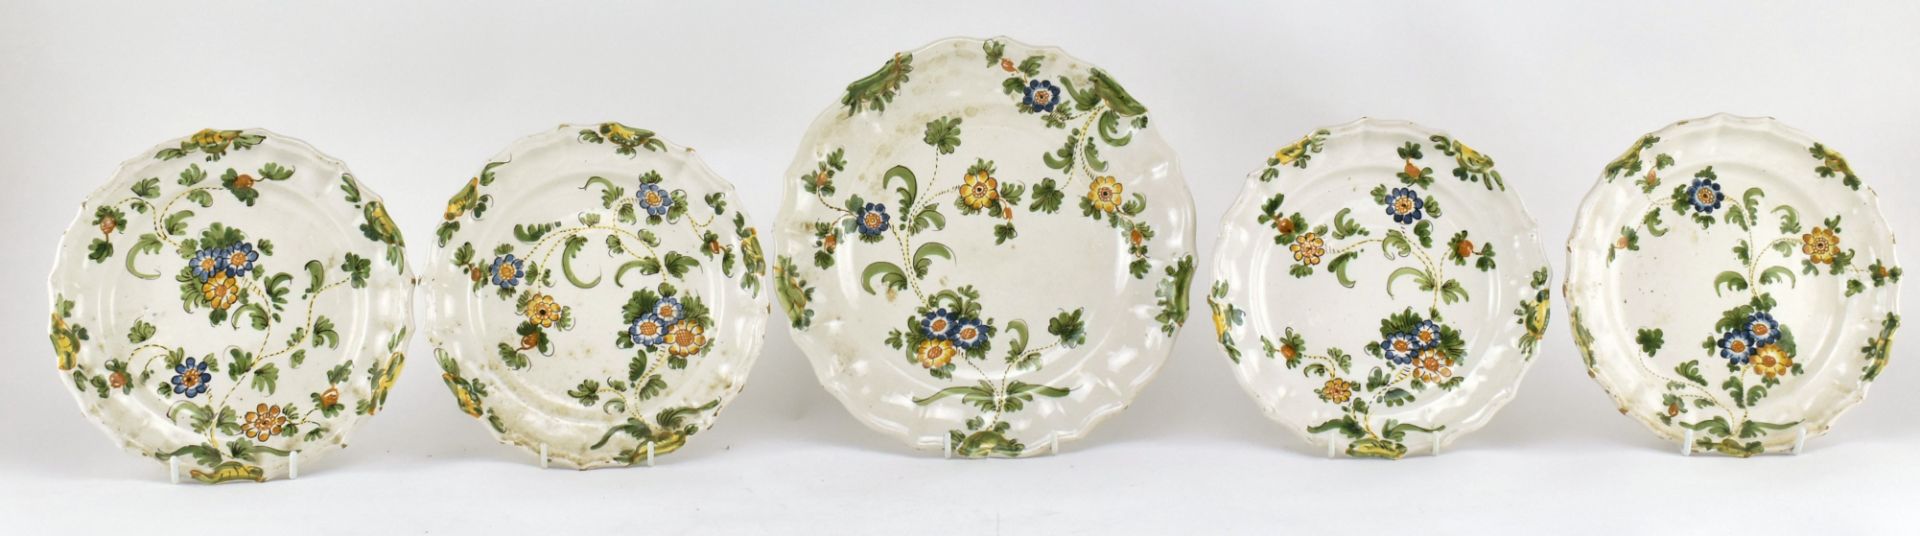 FIVE EARLY 20TH CENTURY CANTAGALLI CERAMIC PLATES